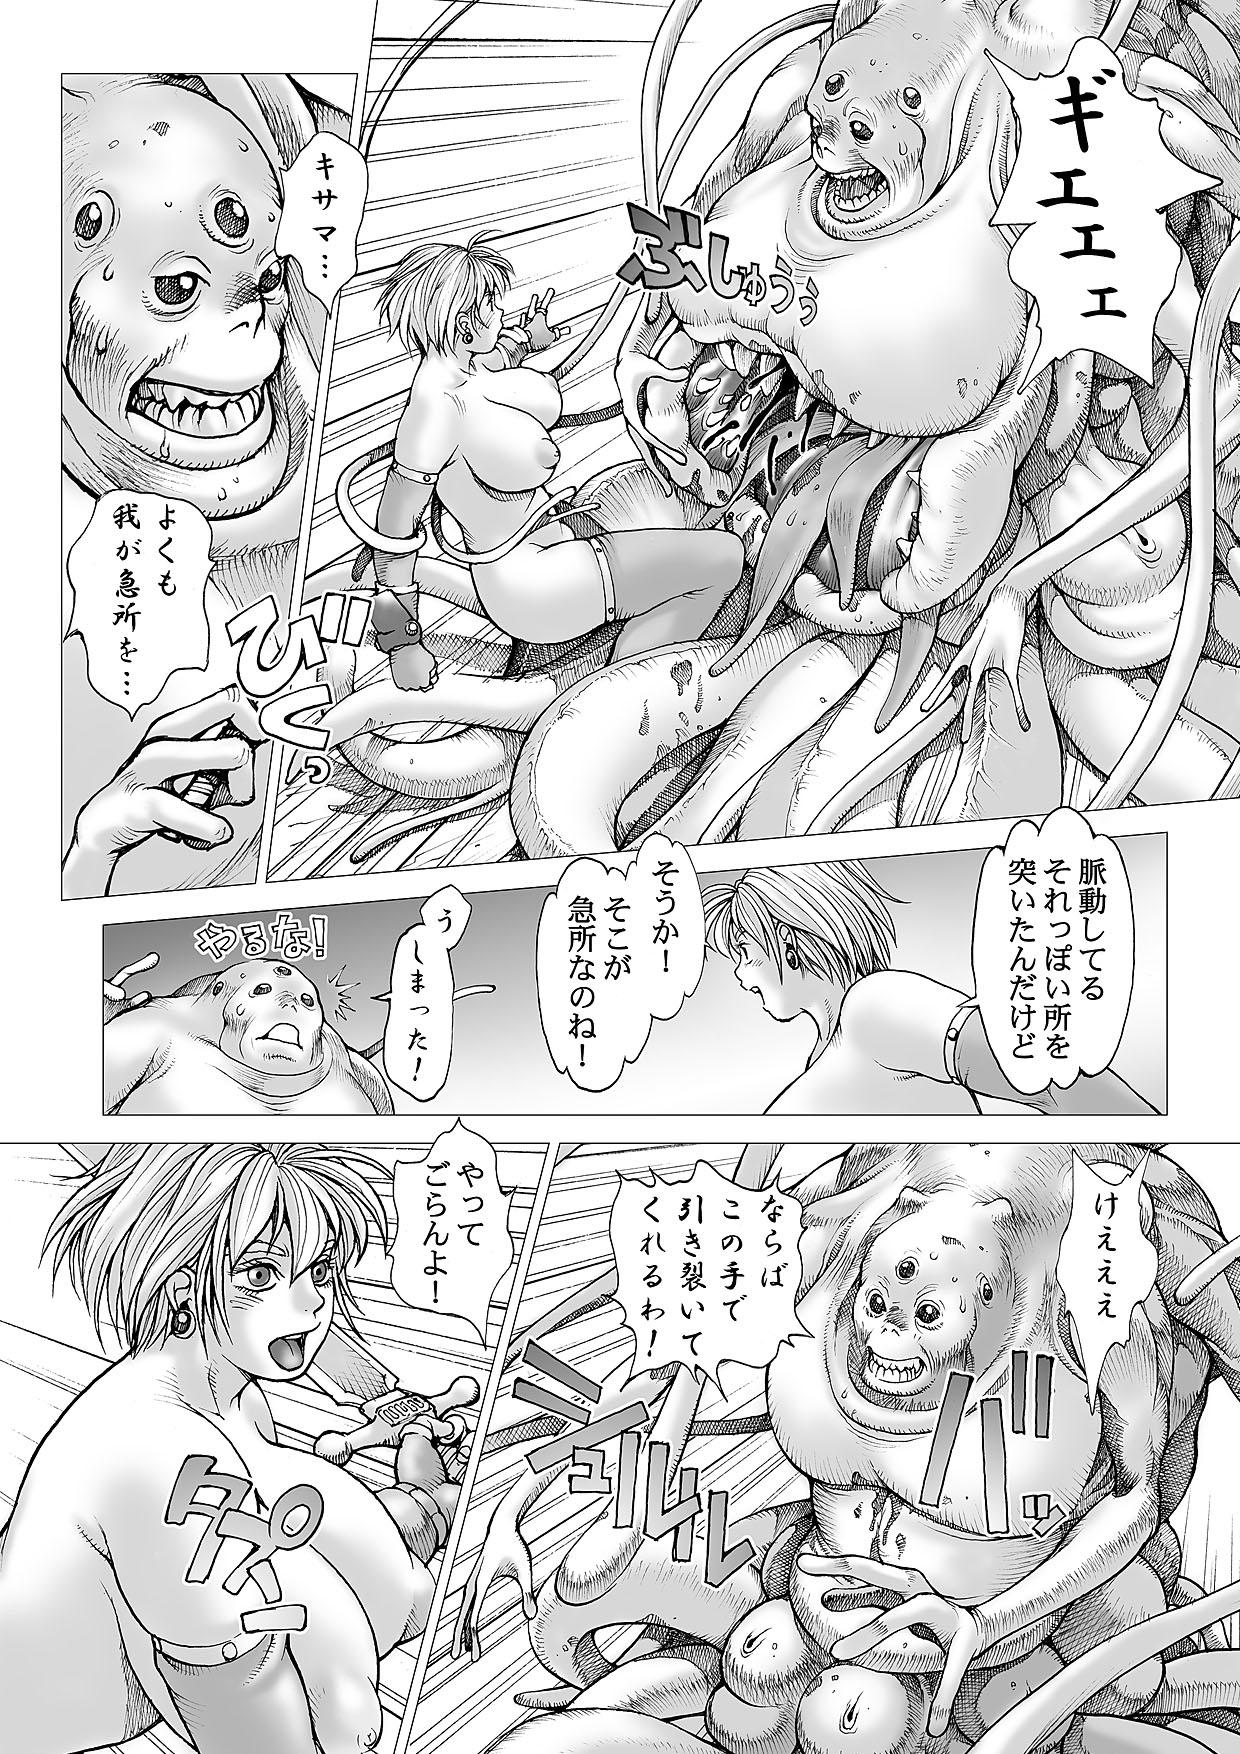 Sexcam Youhei Kozou - Spunky Knight CG collection v6 Missionary - Page 30